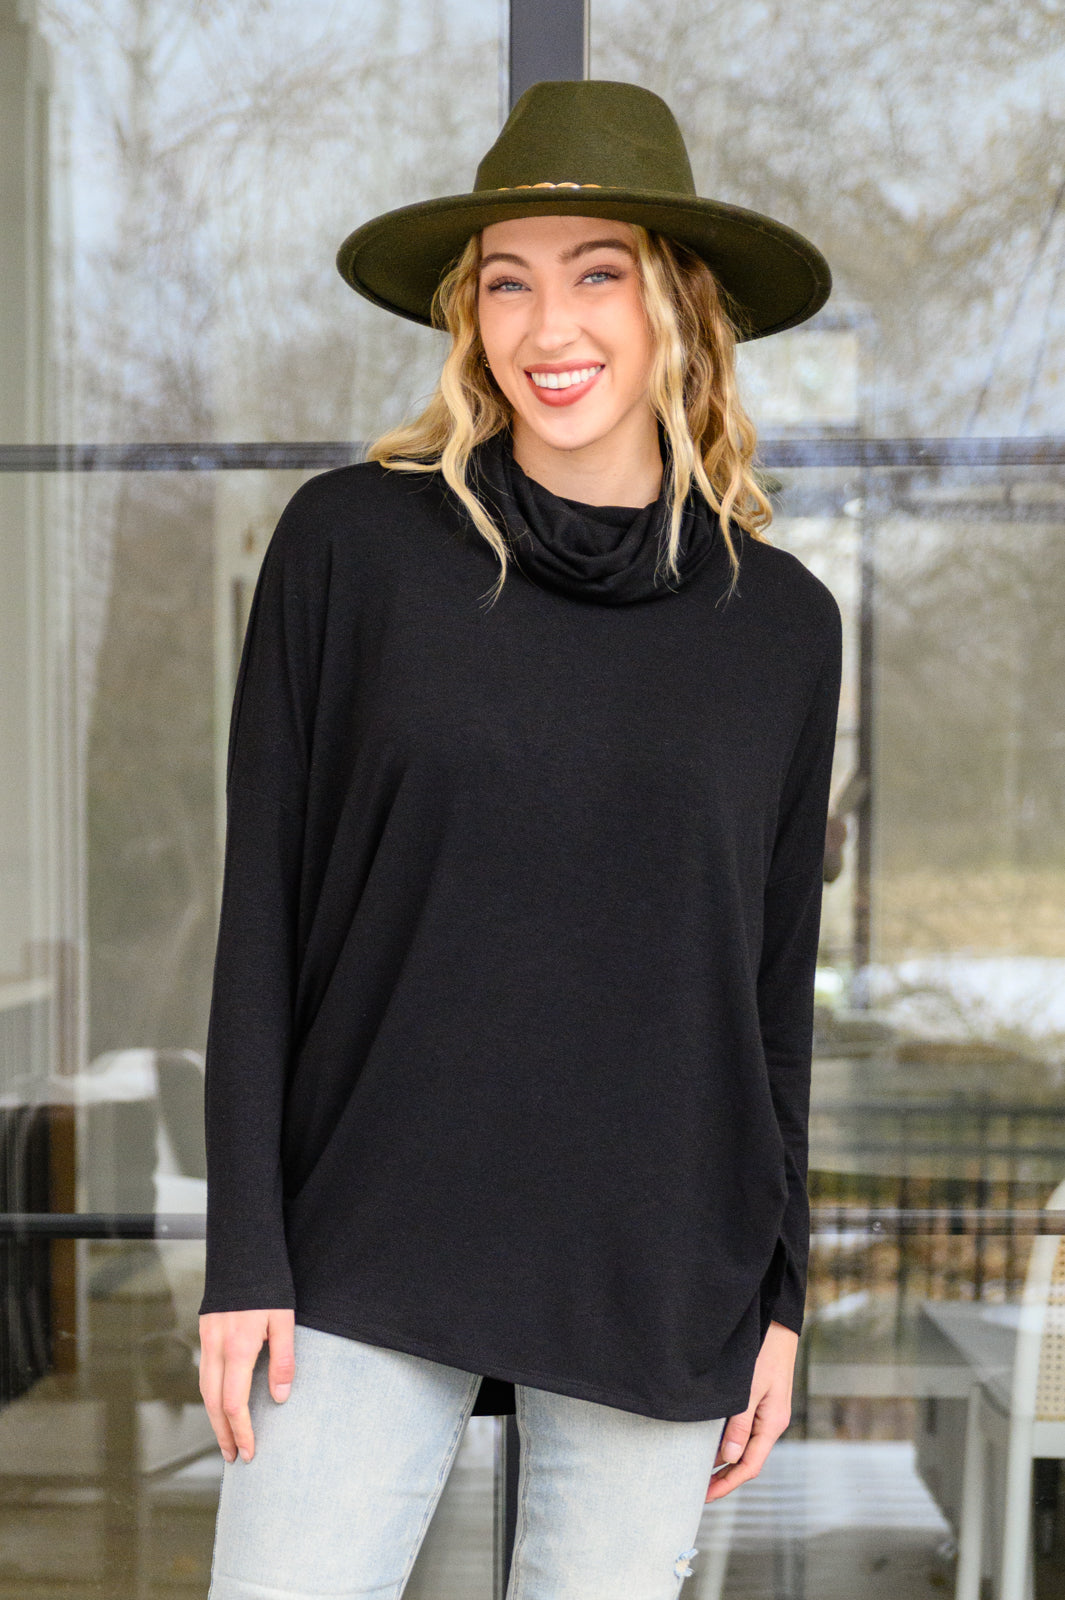 Hilton Cowl Neck Long Sleeve Top in Black - 12/20/2022